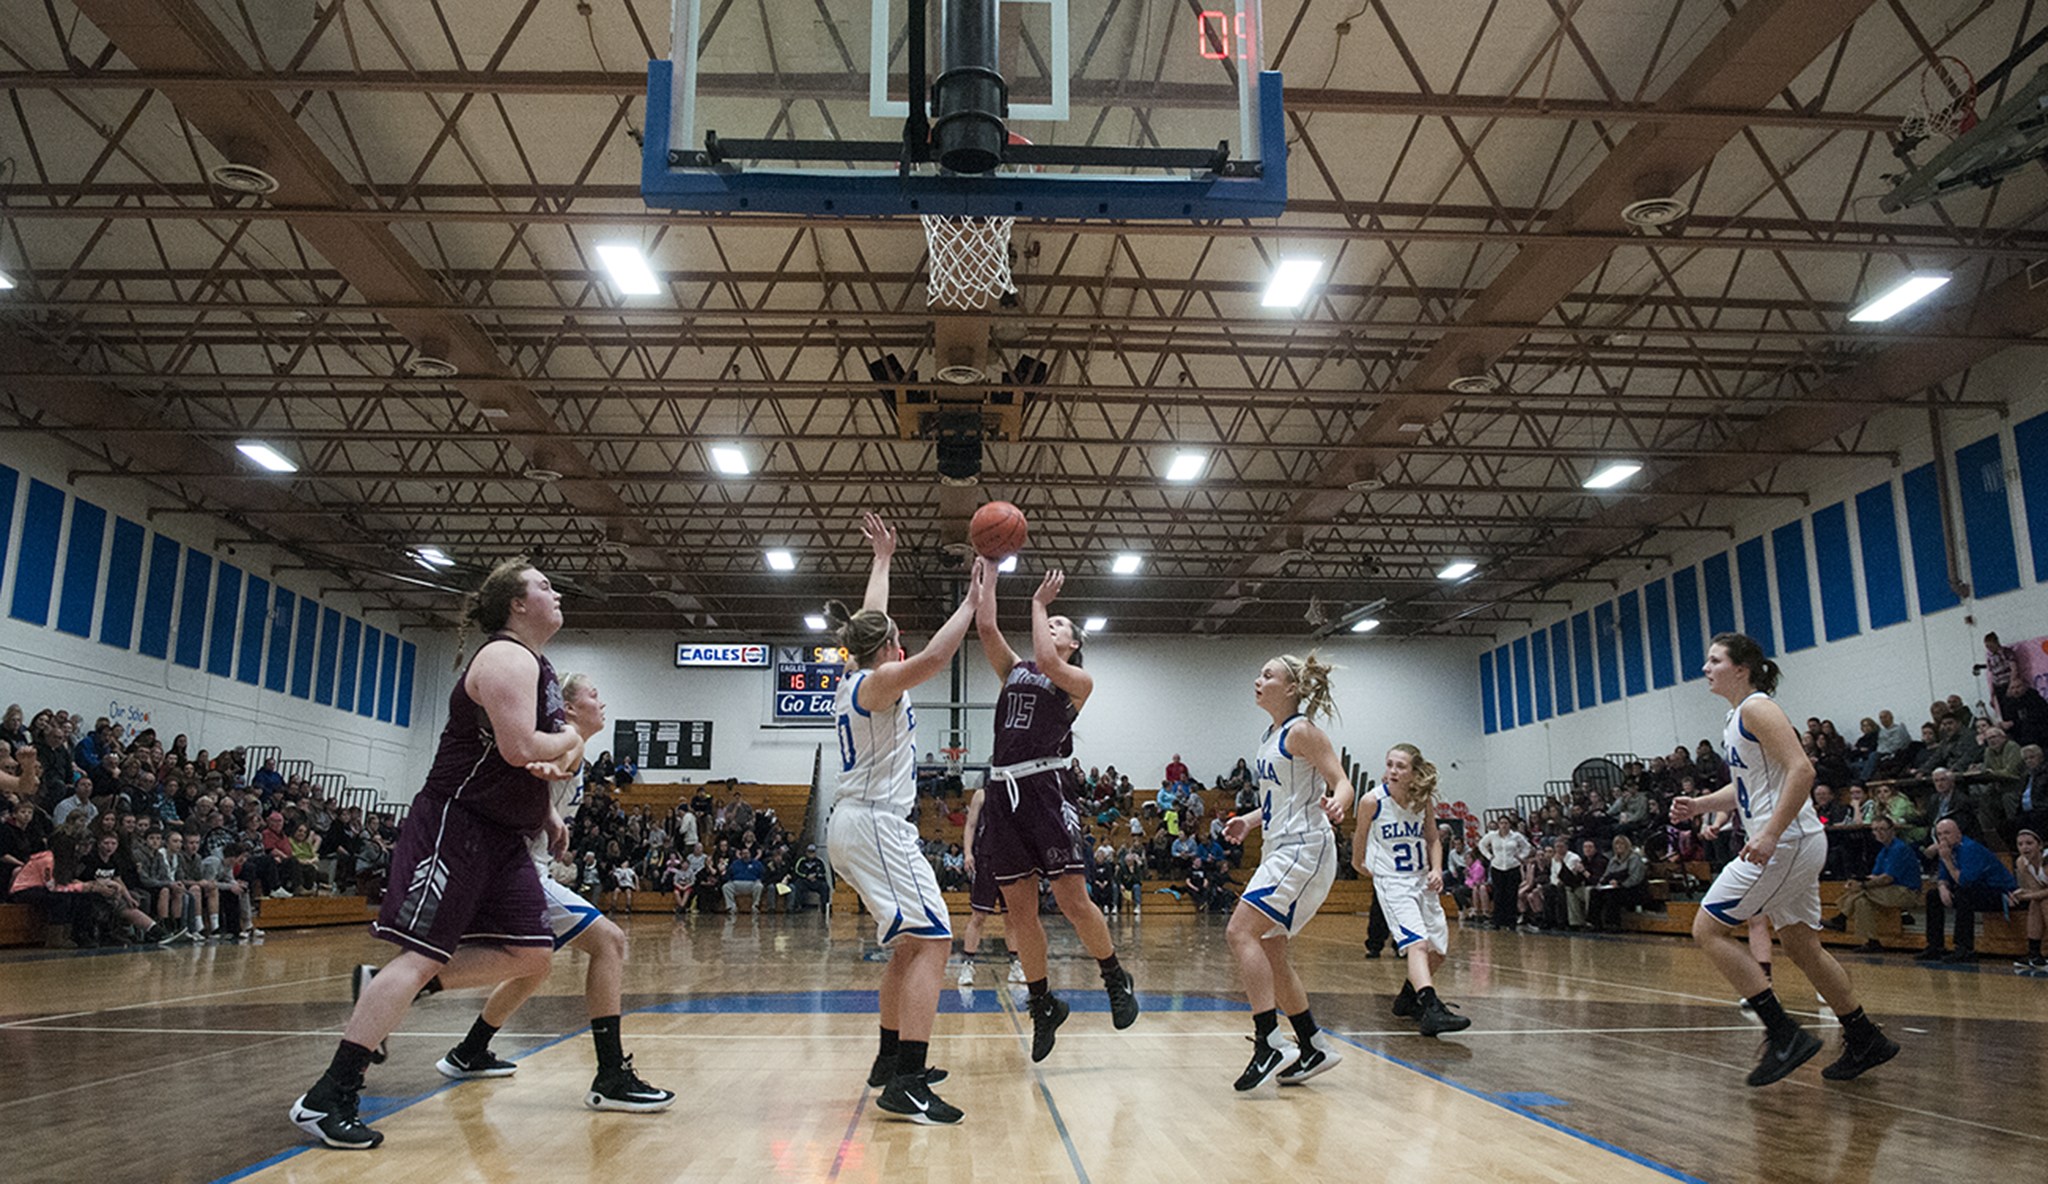 (Brendan Carl | Grays Harbor Newspaper Group) Montesano’s Josie Talley puts up a shot in the lane against Elma in an Evergreen 1A League game at Elma last week.